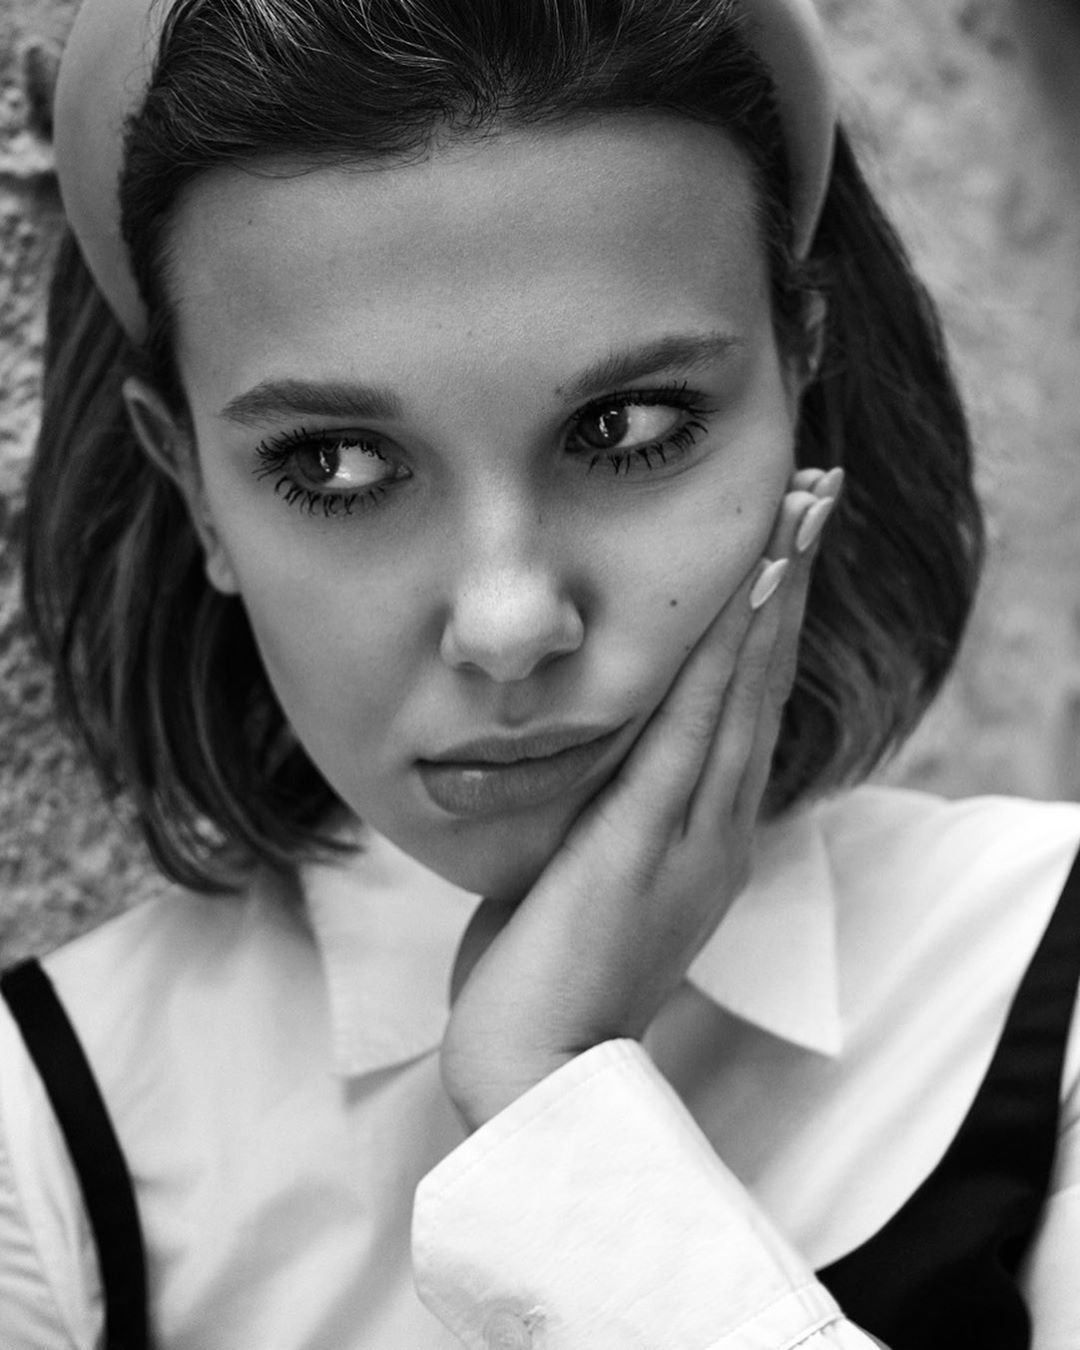 Michael Schwartz on Instagram: “Outtake of Millie. Loved this shot that was never released. And kin. Bobby brown, Millie bobby brown, Bobby brown stranger things